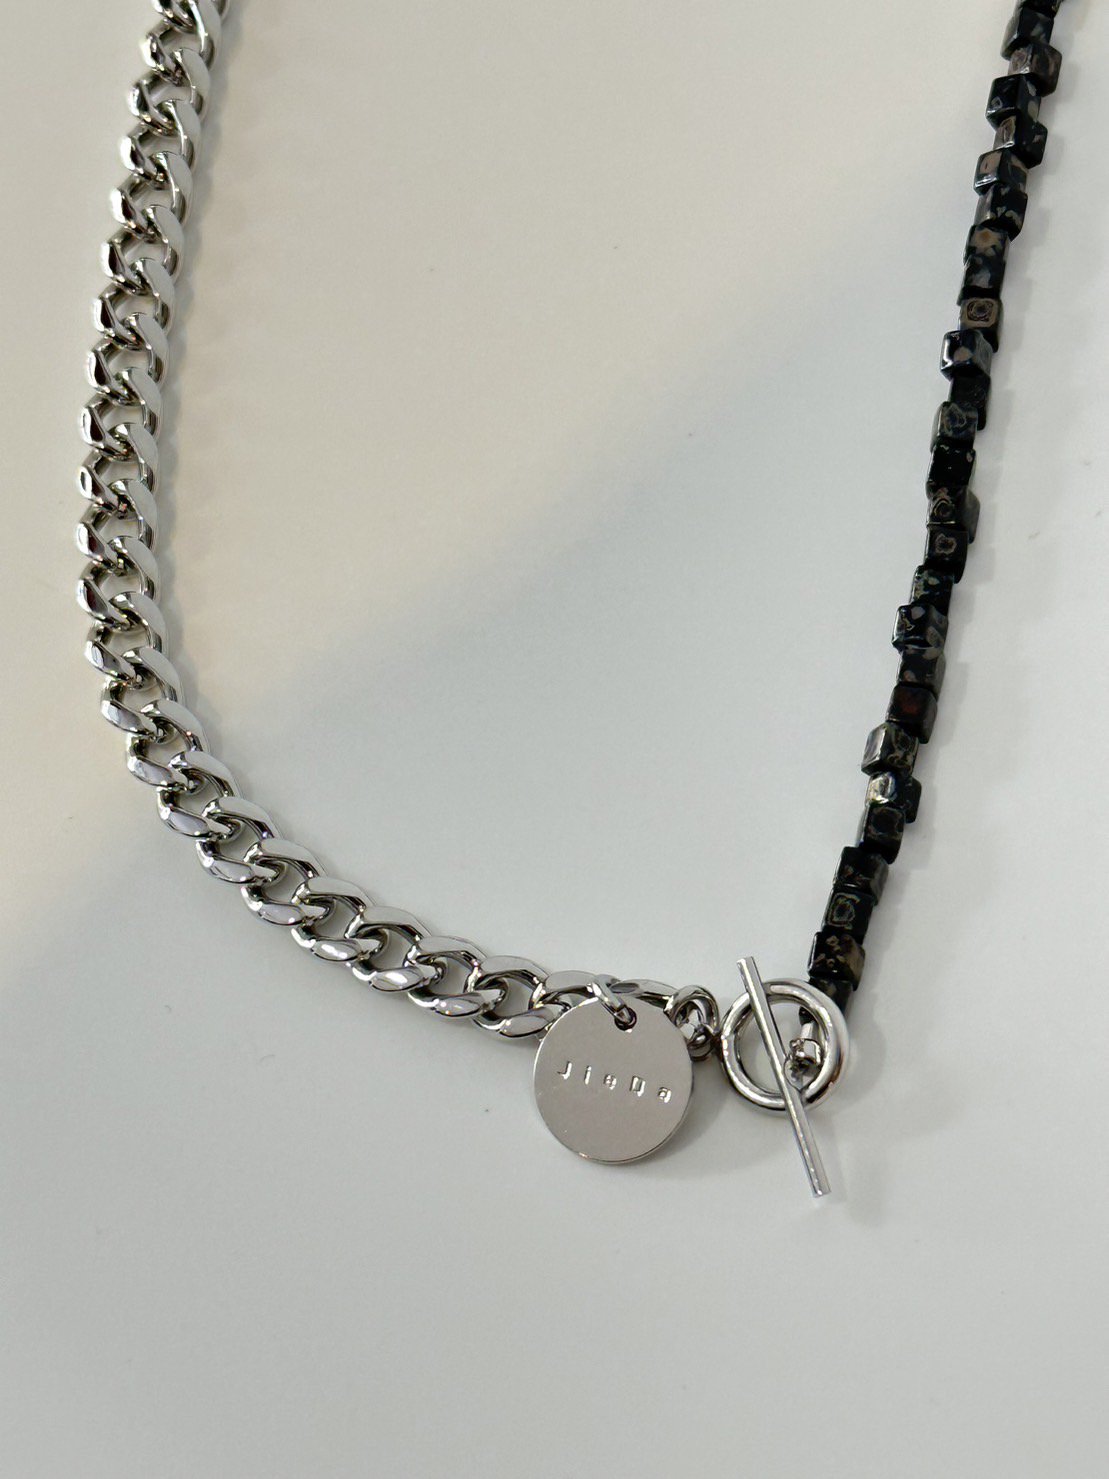 JieDa<br />SWITCHING BEADS NECKLACE / BLACK <img class='new_mark_img2' src='https://img.shop-pro.jp/img/new/icons14.gif' style='border:none;display:inline;margin:0px;padding:0px;width:auto;' />